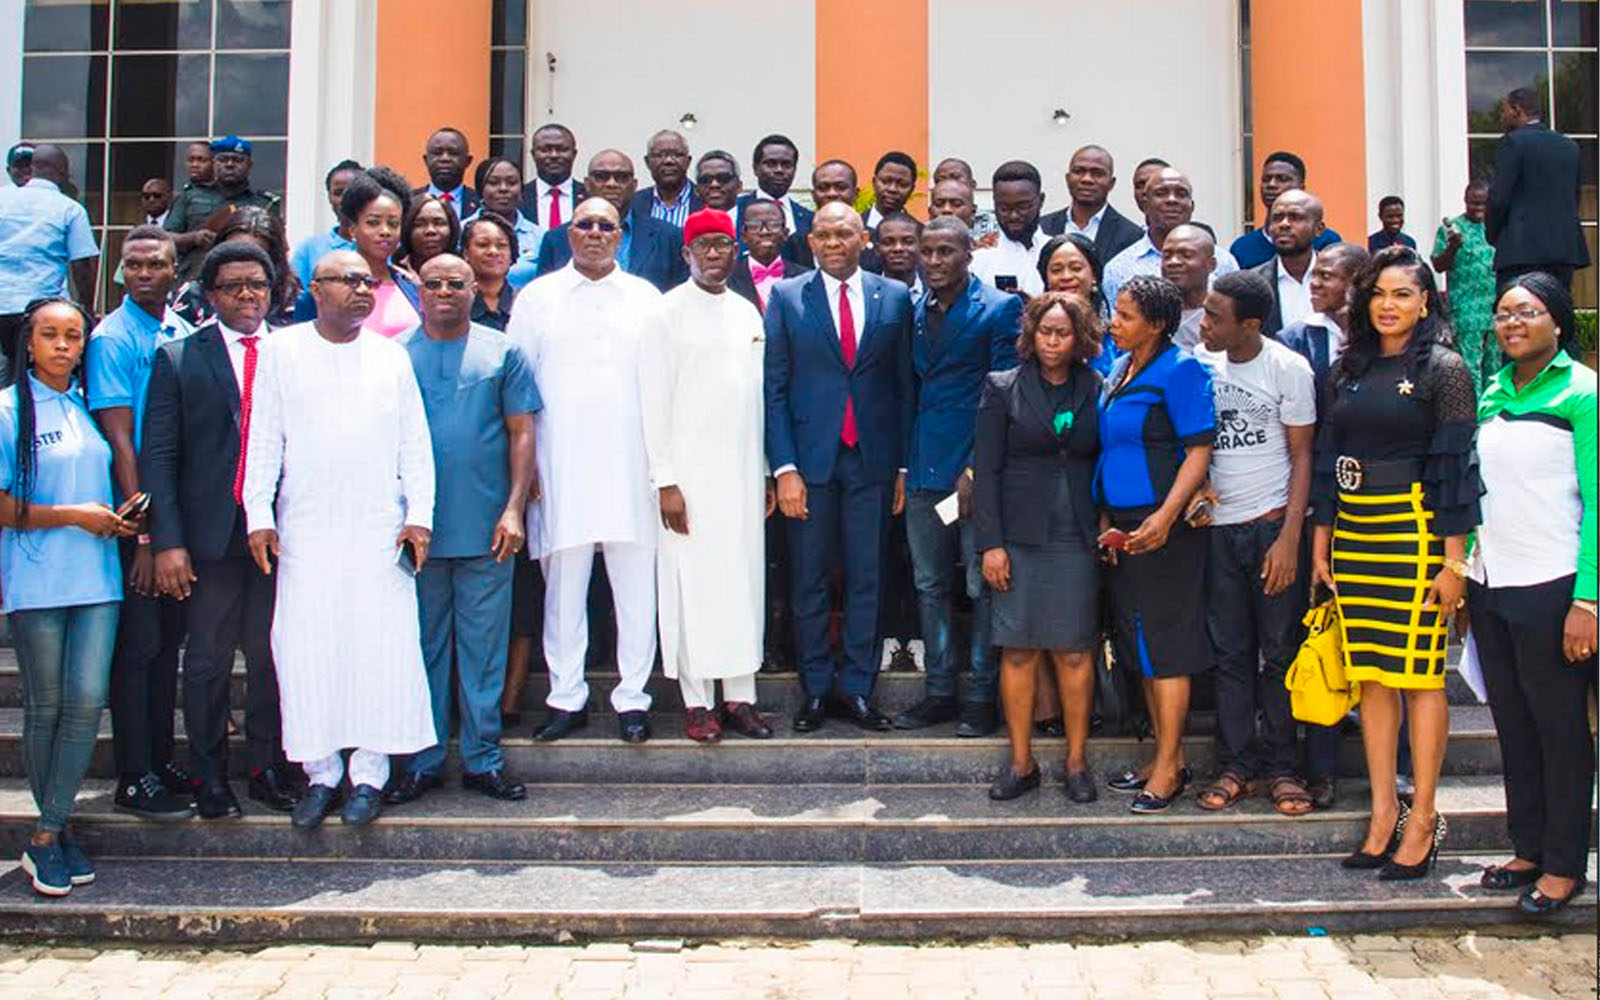 ‘Taking Entrepreneurship Home’: Delta State Governor, Senator Ifeanyi Okowa and the Founder of the Tony Elumelu Foundation(TEF) and Chairman of UBA Plc, Mr. Tony Elumelu, flanked by TEF entrepreneurs from Delta State, during the presentation of the young entrepreneurs to the Governor at the State House in Asaba, Delta State on Thursday.